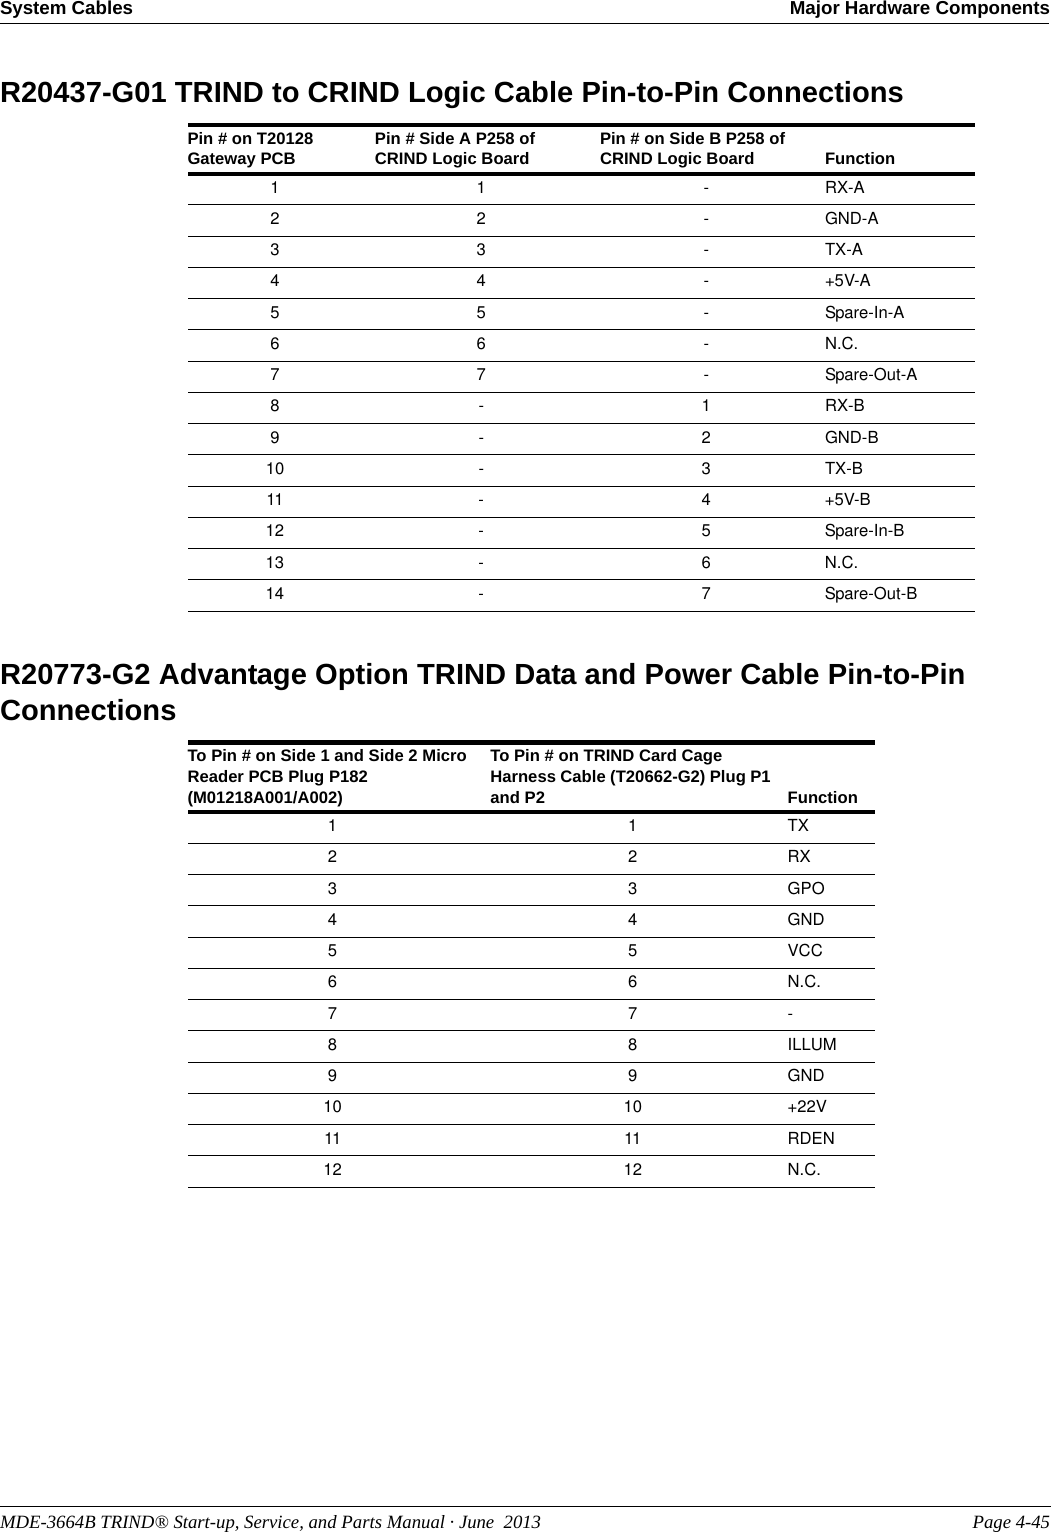 MDE-3664B TRIND® Start-up, Service, and Parts Manual · June  2013 Page 4-45System Cables Major Hardware ComponentsR20437-G01 TRIND to CRIND Logic Cable Pin-to-Pin ConnectionsPin # on T20128 Gateway PCB Pin # Side A P258 of CRIND Logic Board Pin # on Side B P258 of CRIND Logic Board Function1 1 - RX-A2 2 - GND-A3 3 - TX-A4 4 - +5V-A5 5 - Spare-In-A6 6 - N.C.7 7 - Spare-Out-A8 - 1 RX-B9 - 2 GND-B10 - 3 TX-B11 - 4 +5V-B12 - 5 Spare-In-B13 - 6 N.C.14 - 7 Spare-Out-BR20773-G2 Advantage Option TRIND Data and Power Cable Pin-to-Pin ConnectionsTo Pin # on Side 1 and Side 2 Micro Reader PCB Plug P182 (M01218A001/A002)To Pin # on TRIND Card Cage Harness Cable (T20662-G2) Plug P1 and P2 Function1 1 TX2 2 RX3 3 GPO4 4 GND5 5 VCC6 6 N.C.7 7 -8 8 ILLUM9 9 GND10 10 +22V11 11 RDEN12 12 N.C.